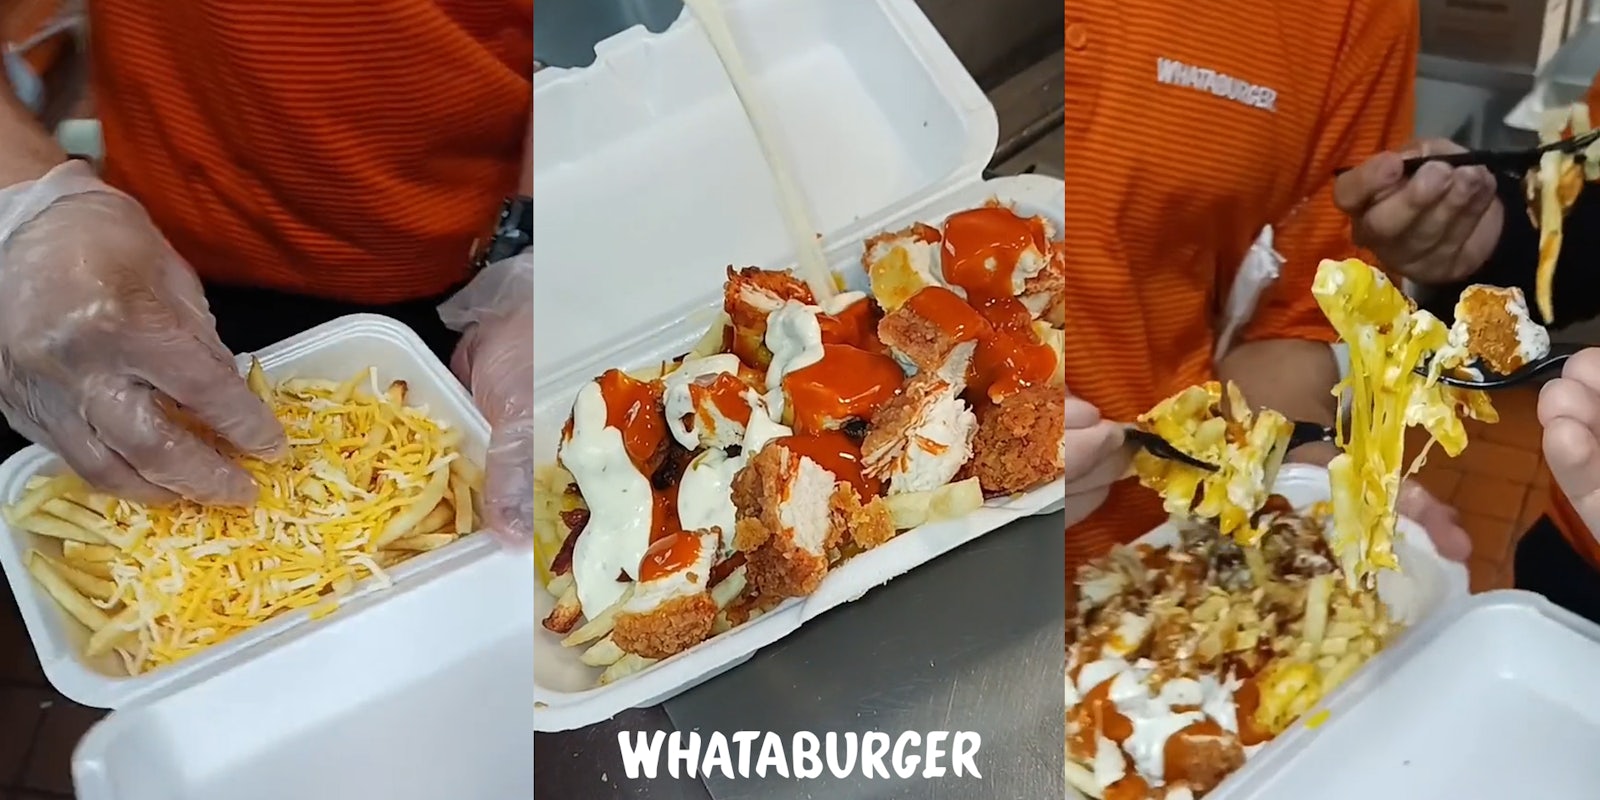 Whataburger worker putting cheese on fries (l) buffalo ranch loaded fries in container with ranch pouring onto it with Whataburger logo at bottom (c) Whataburger employees eating buffalo loaded fries (r)